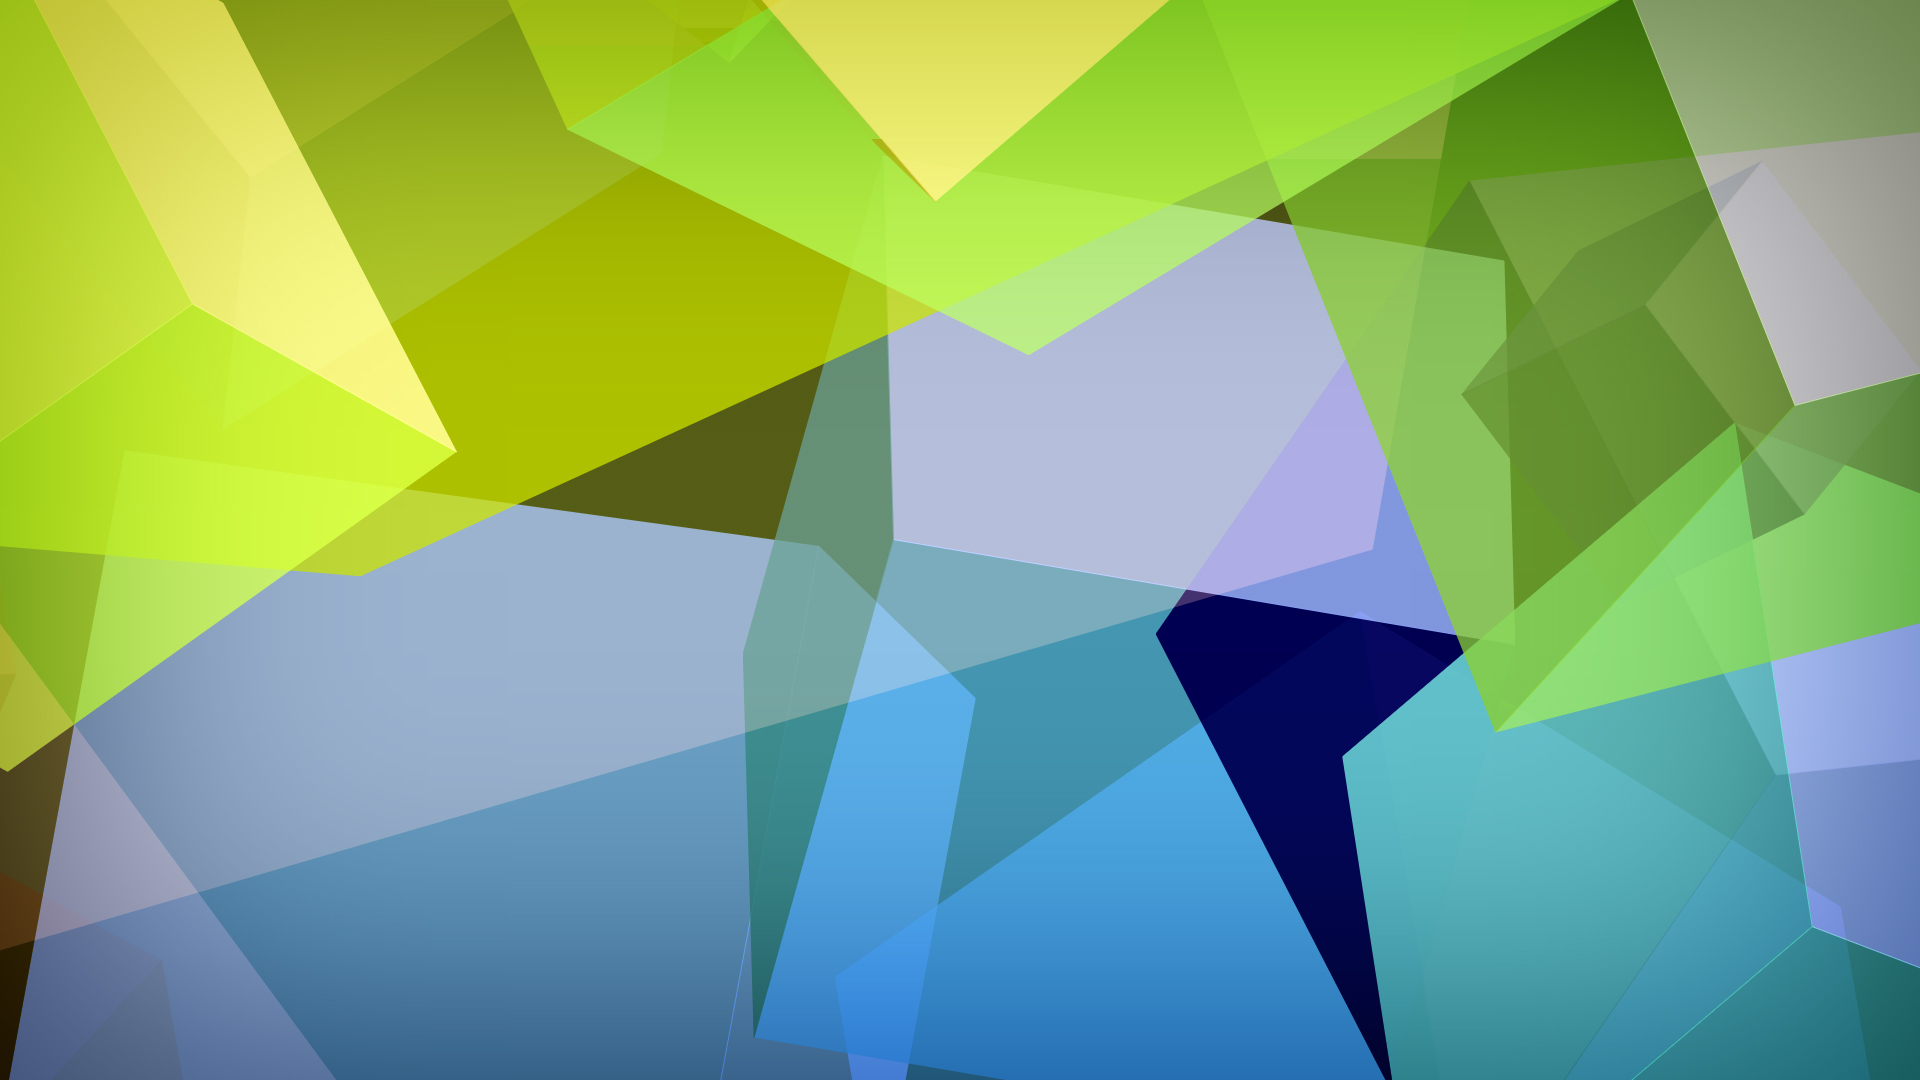 abstract wallpapers shapes colored geometric wallpaperjpg 1920x1080